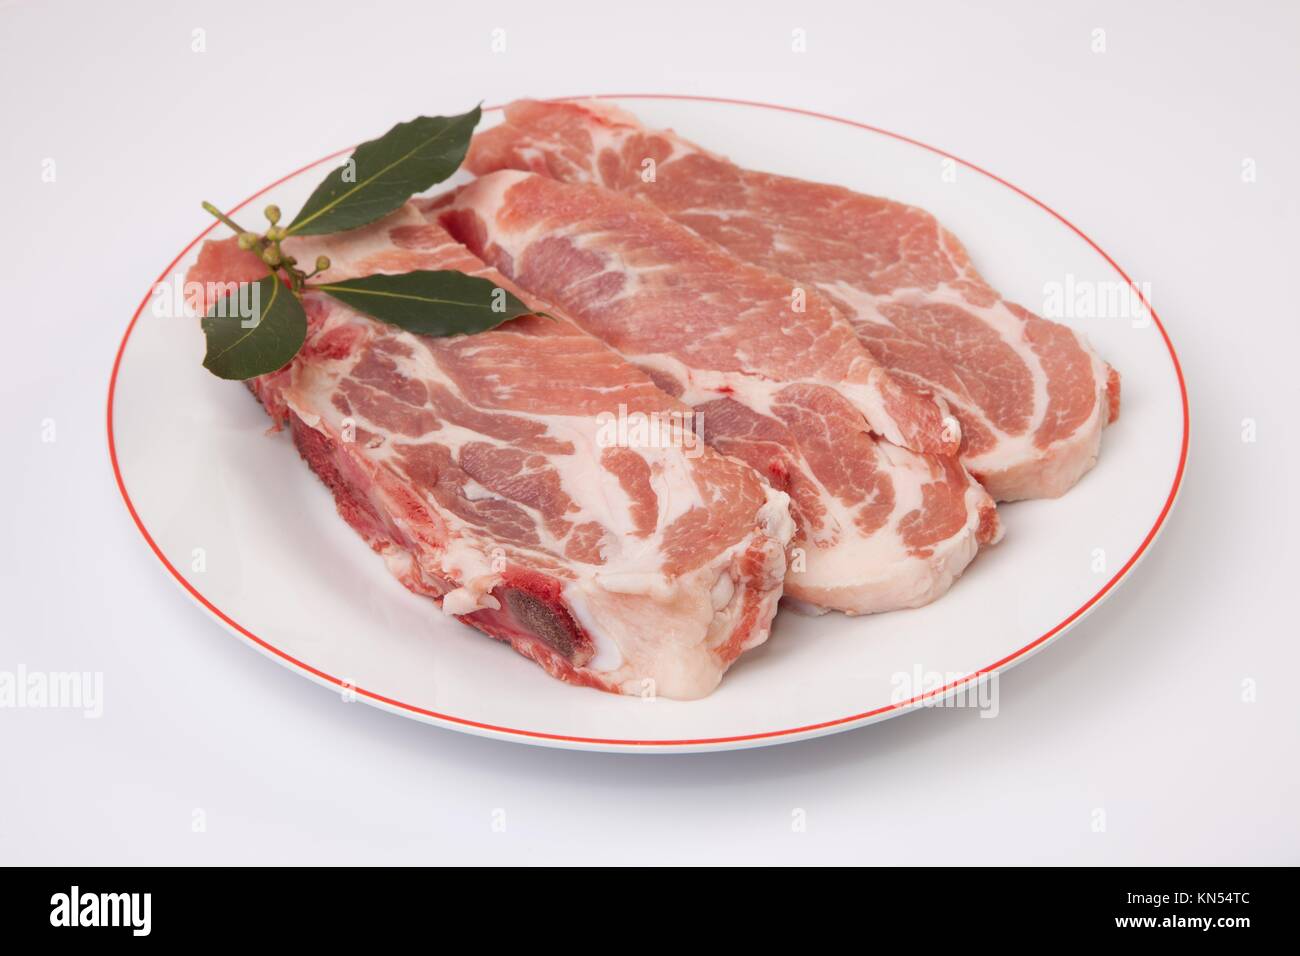 Middle rib chops of pork over plate. Isolated on white with bay. Stock Photo